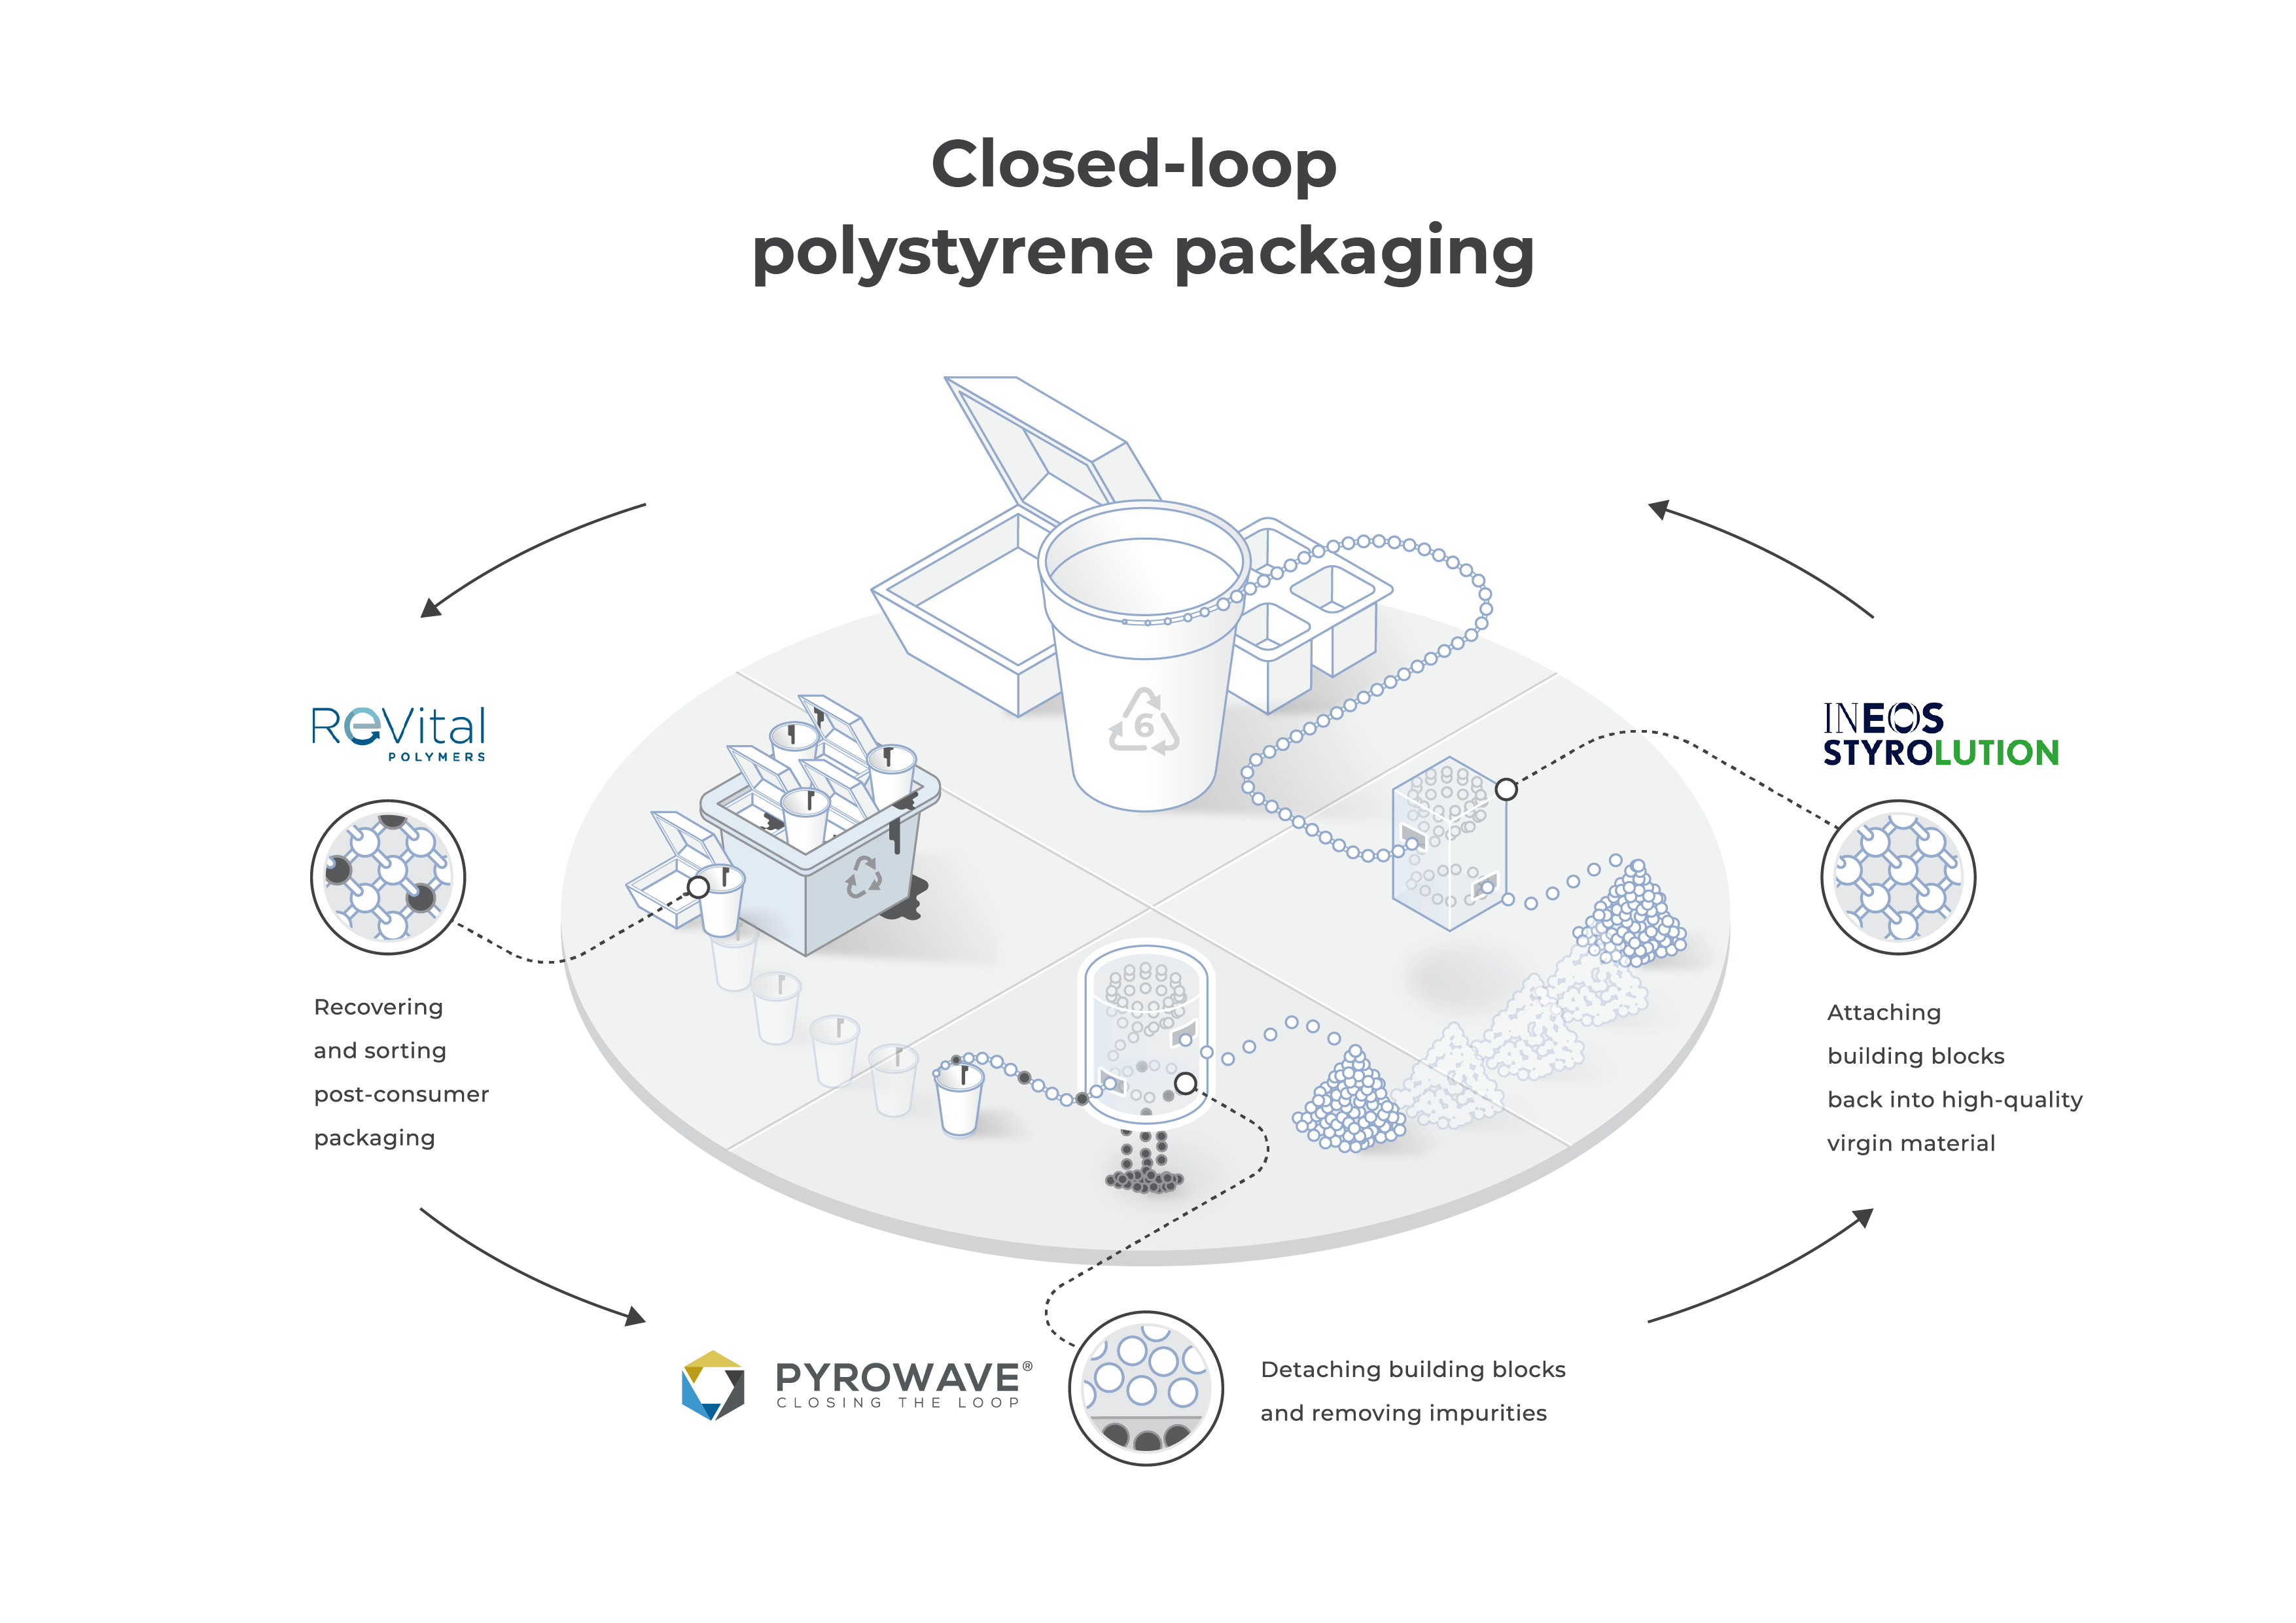 ReVital Polymers, Pyrowave and INEOS Styrolution collaborate to launch closed-loop North American polystyrene recycling consortium